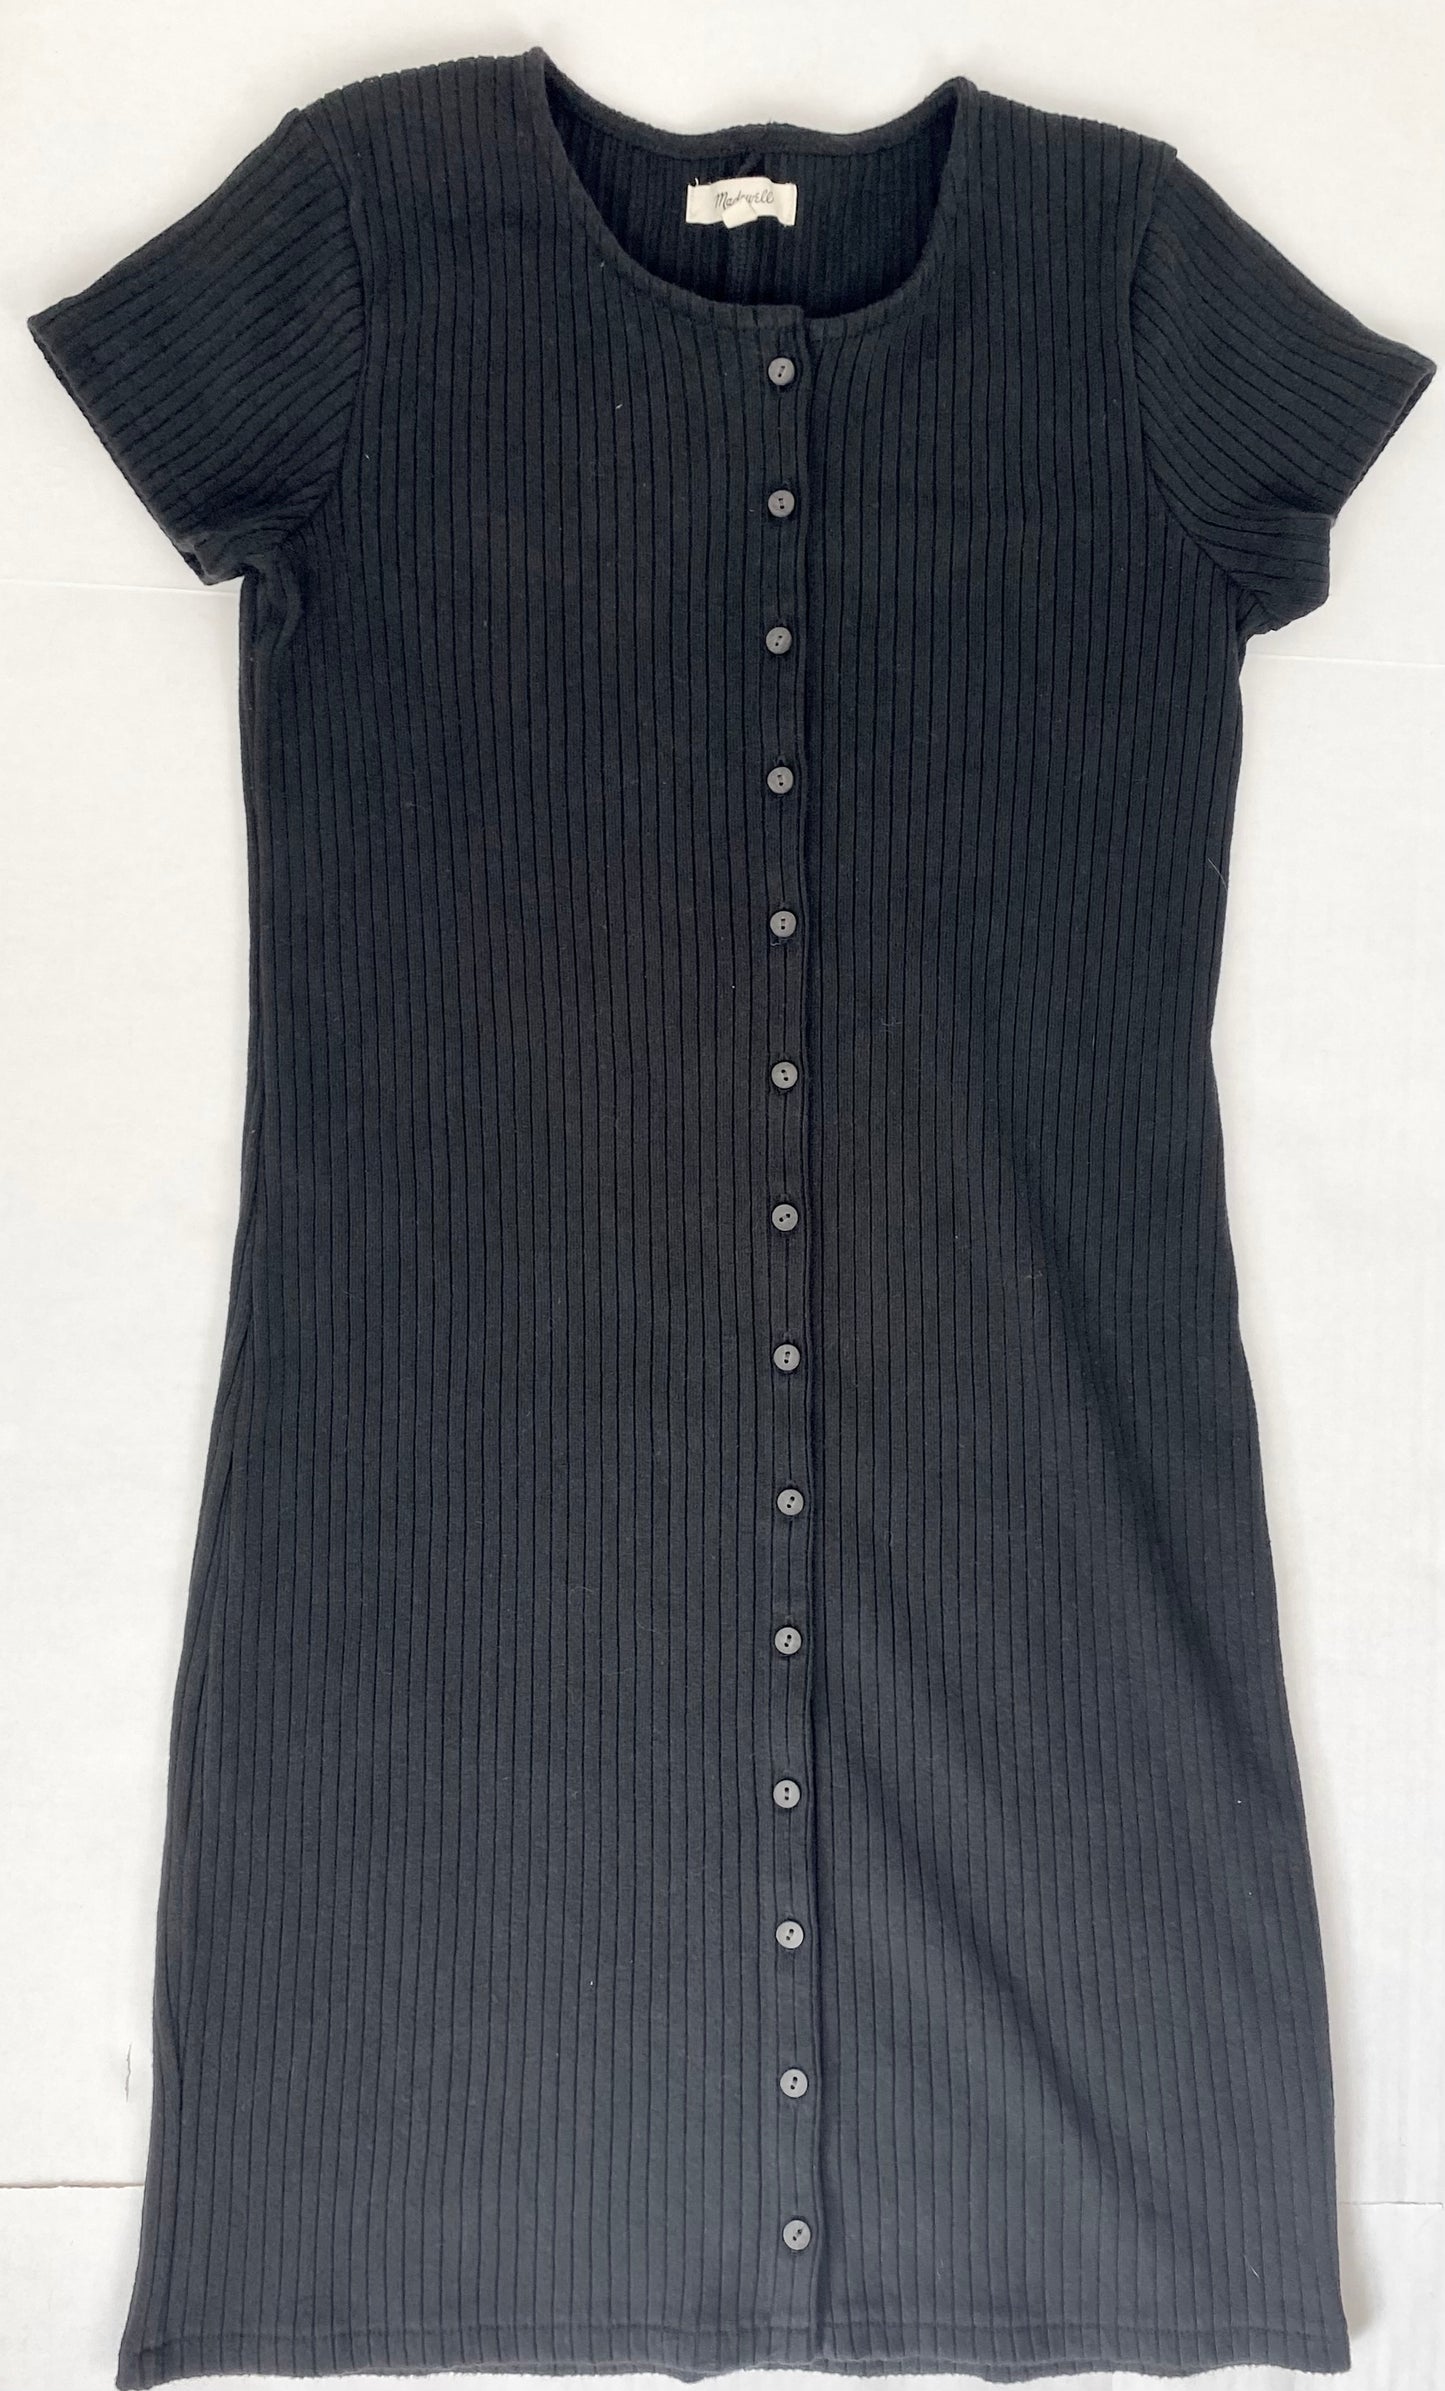 Women-Small Madewell Black Textured Stretch Rib Cotton 90's Style Dress Button Front